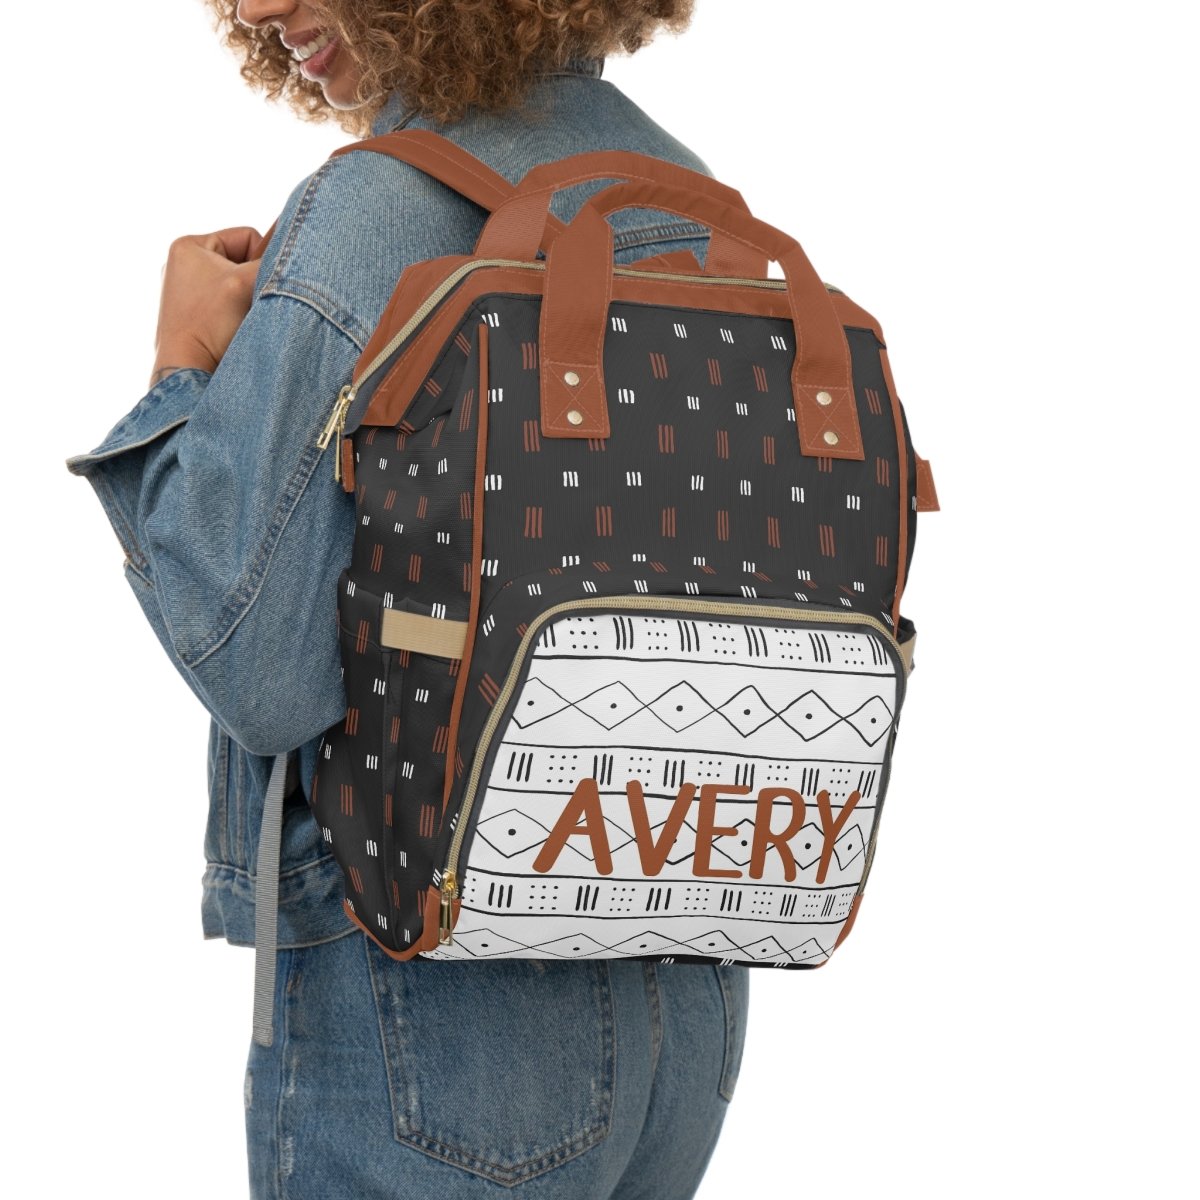 Modern Mudcloth Personalized Backpack Diaper Bag - gender_boy, Modern Mudcloth, text